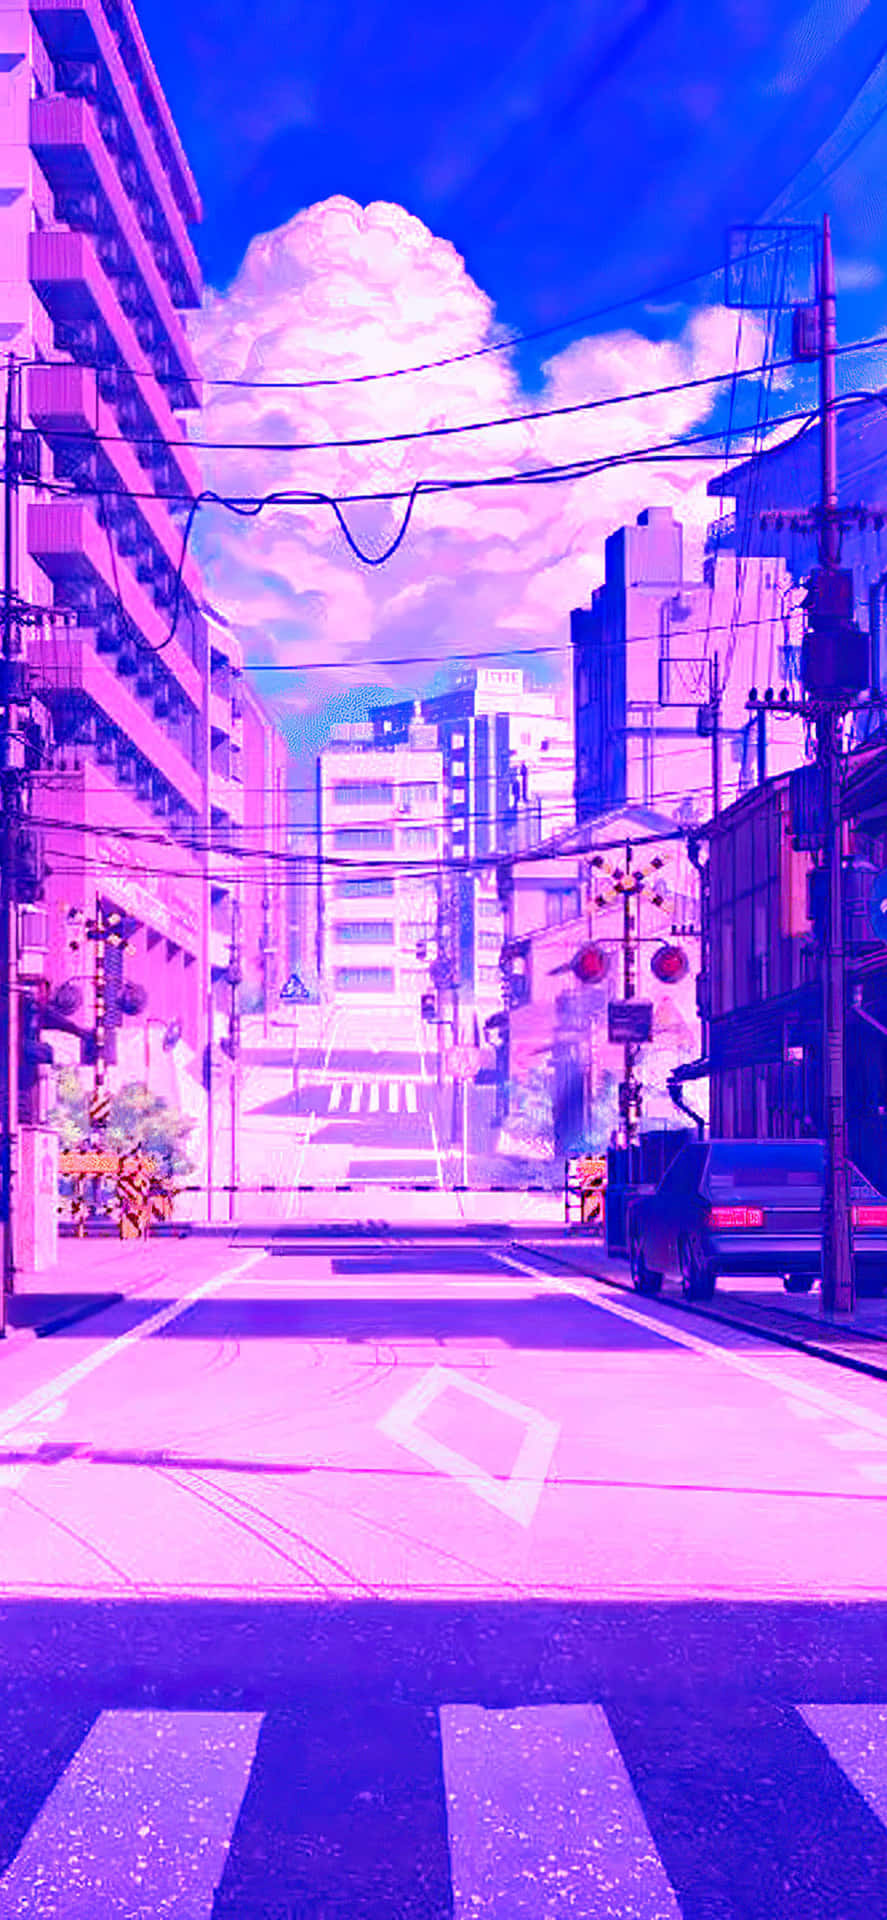 A view of Japanese town with an emphasis on purple. Wallpaper